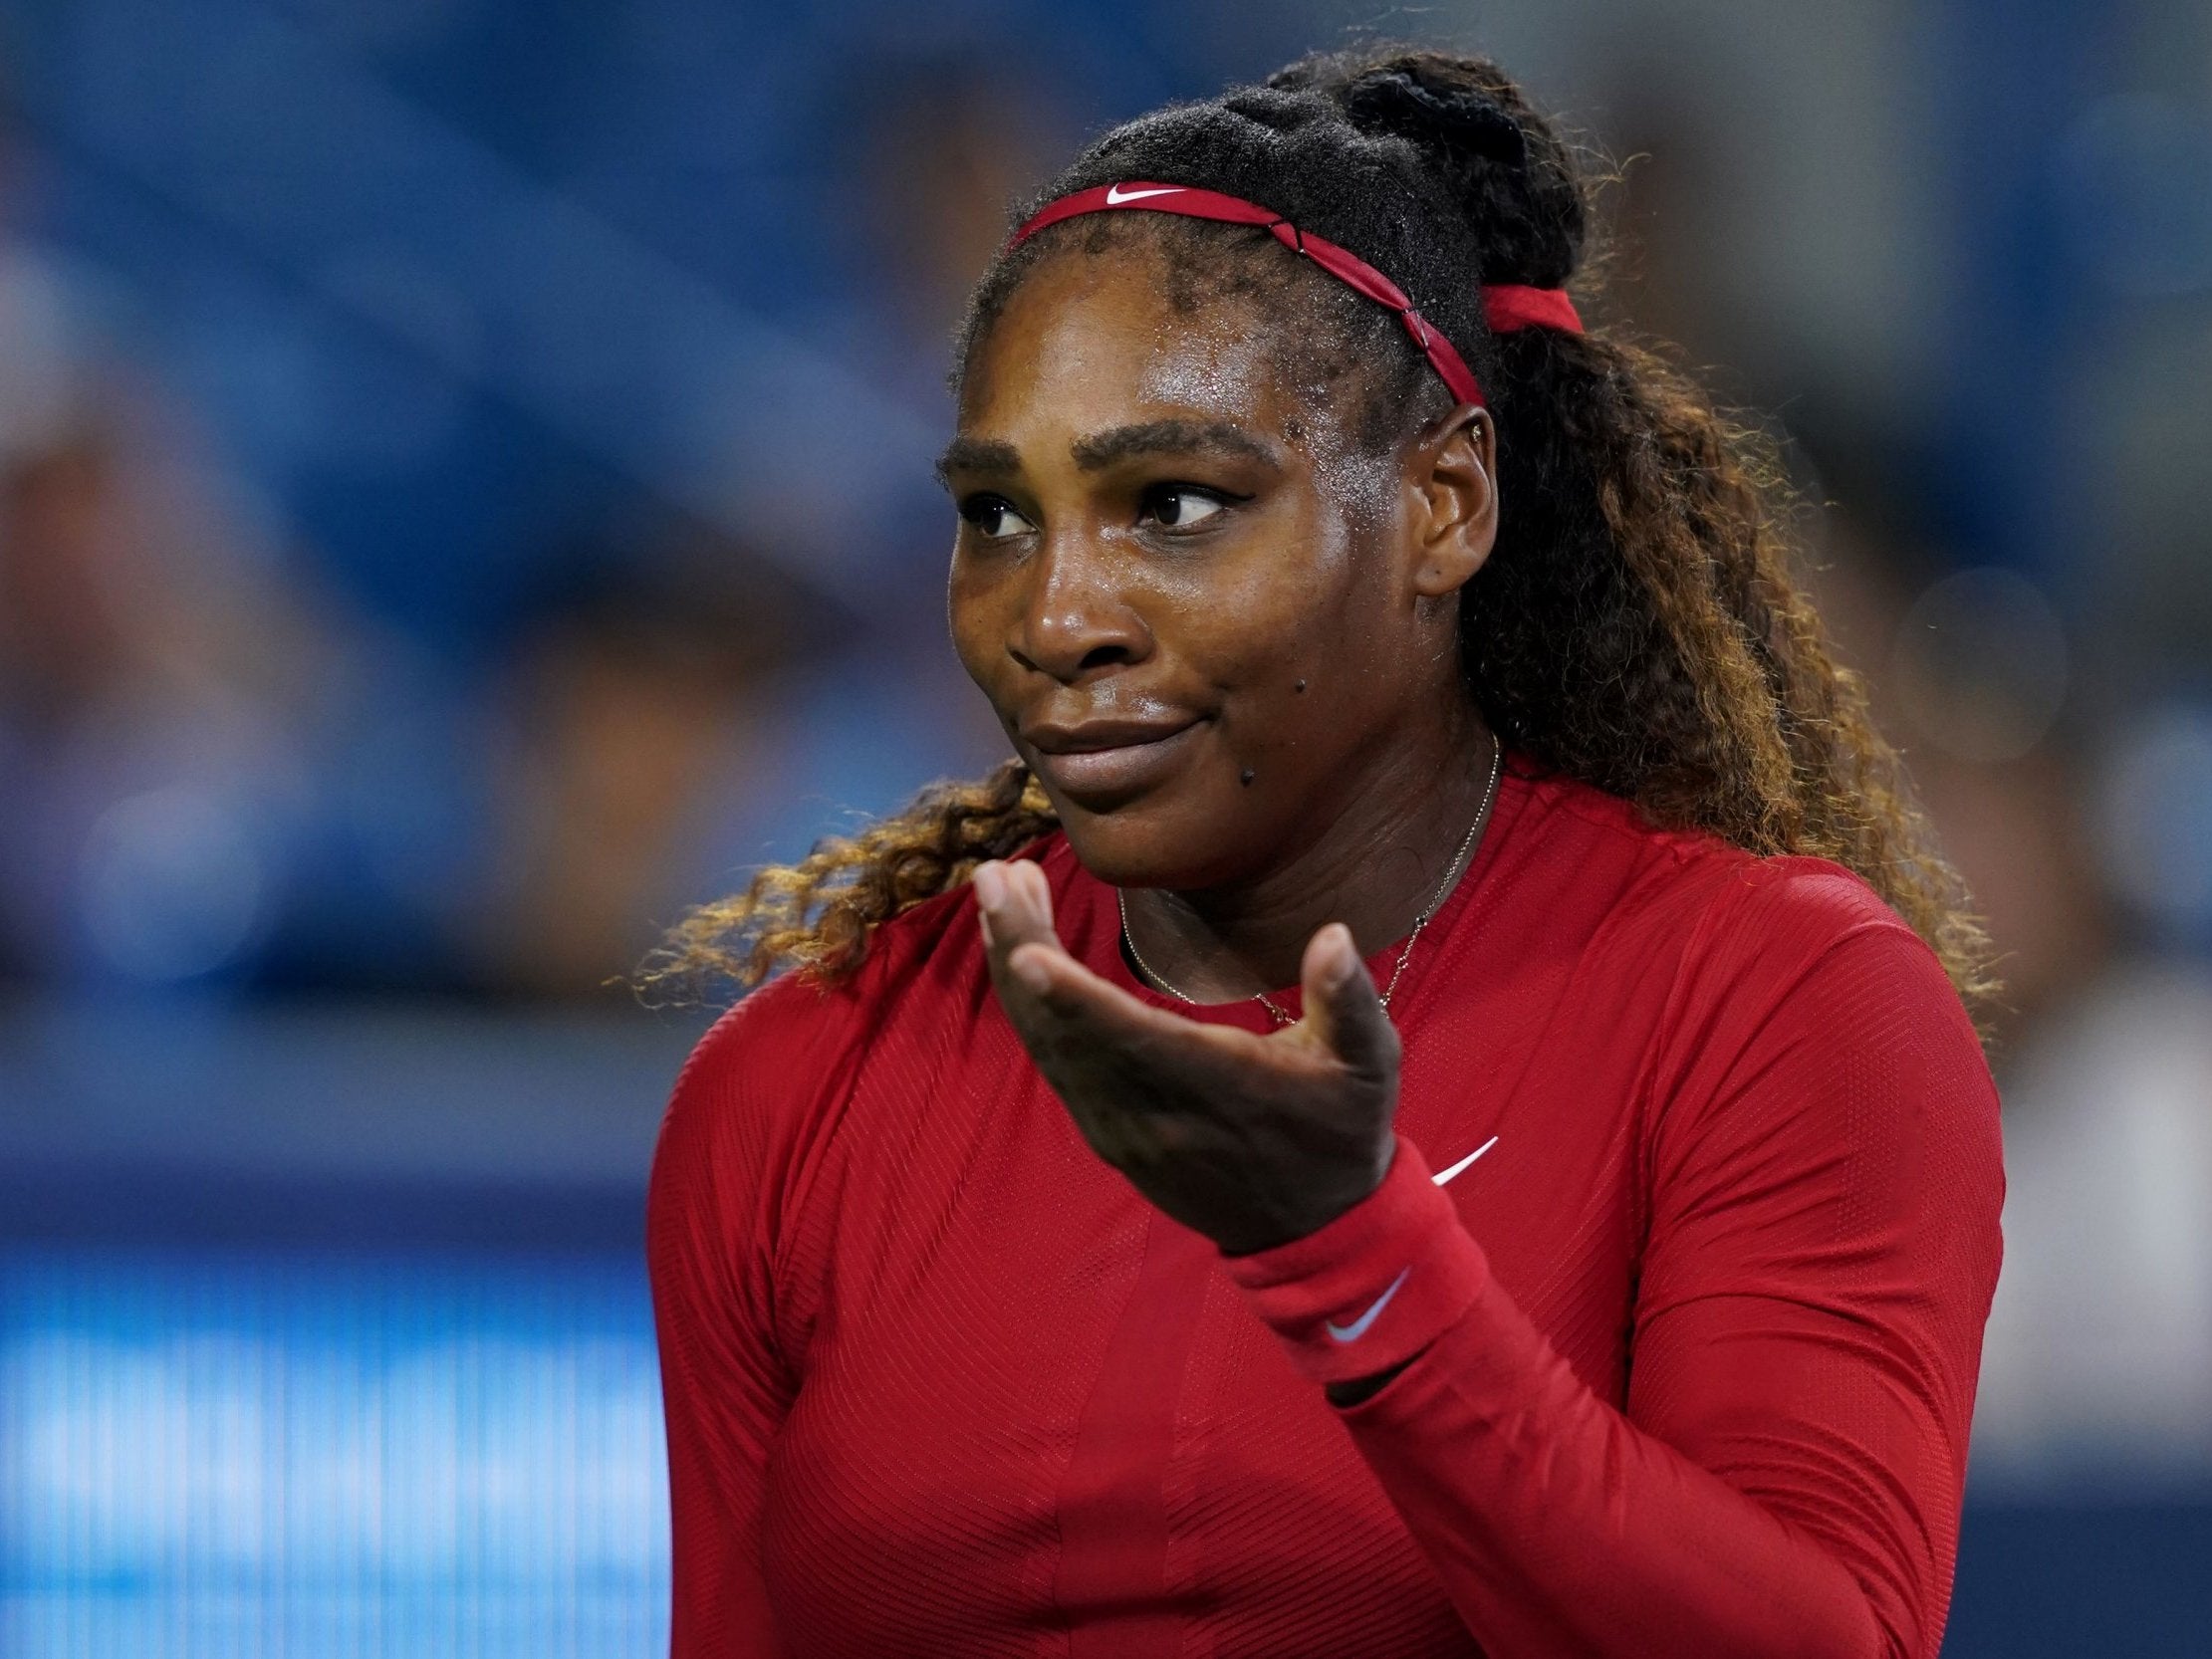 Serena Williams stressed she needs time to get back to her past levels